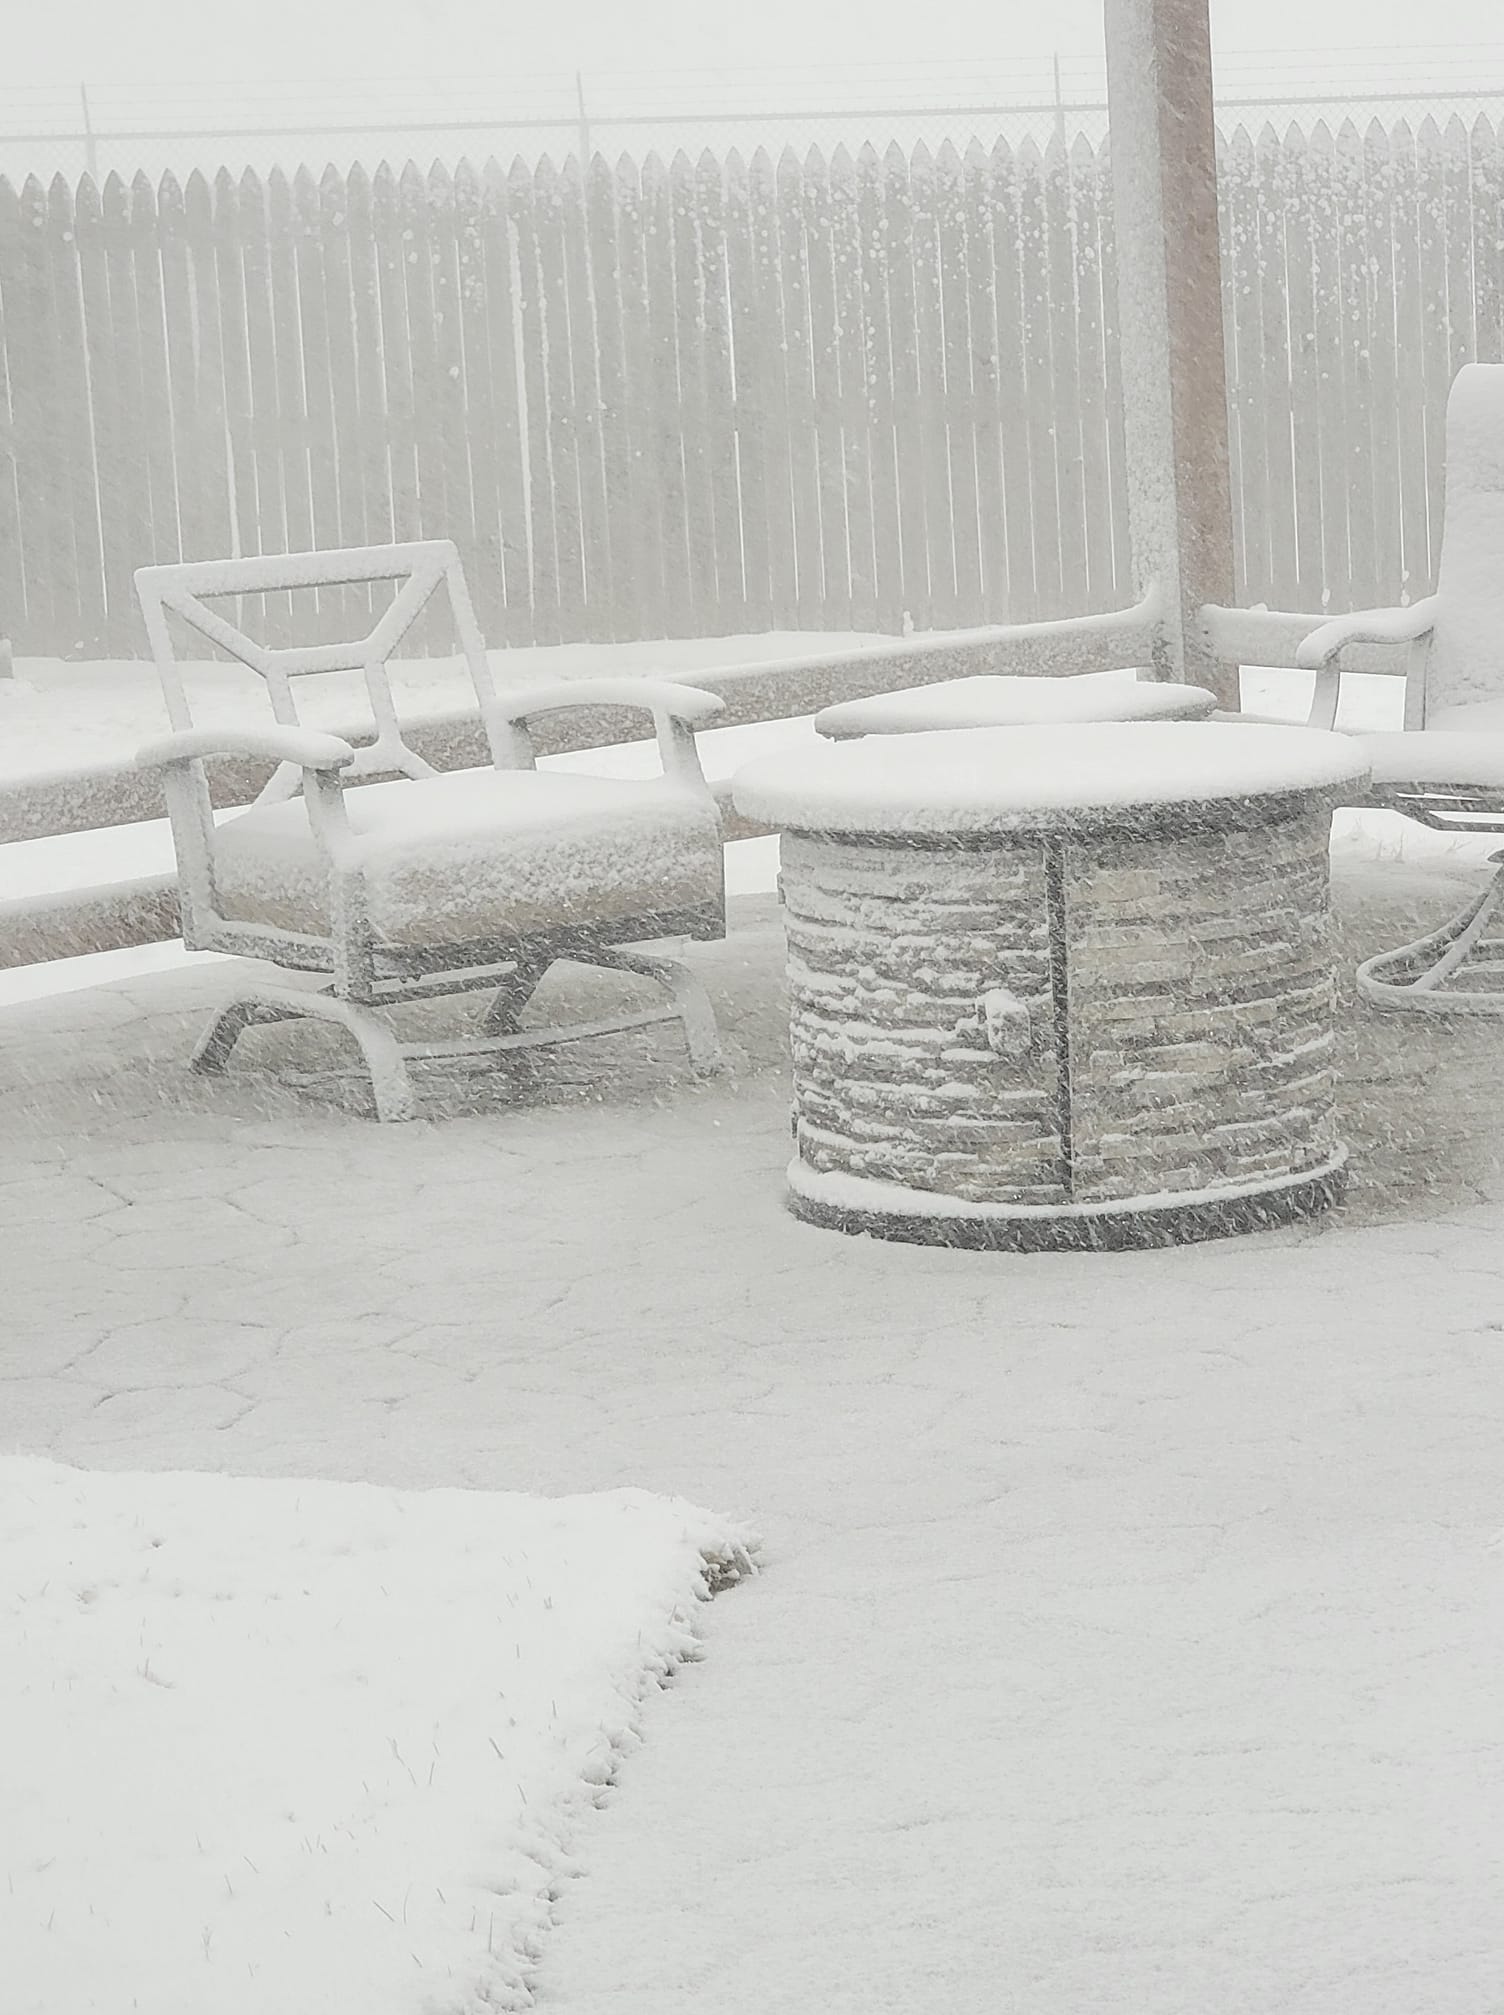 Photo of a snowy patio in Borger, Texas on February 15th, 2023. Photo by Byron Matthews